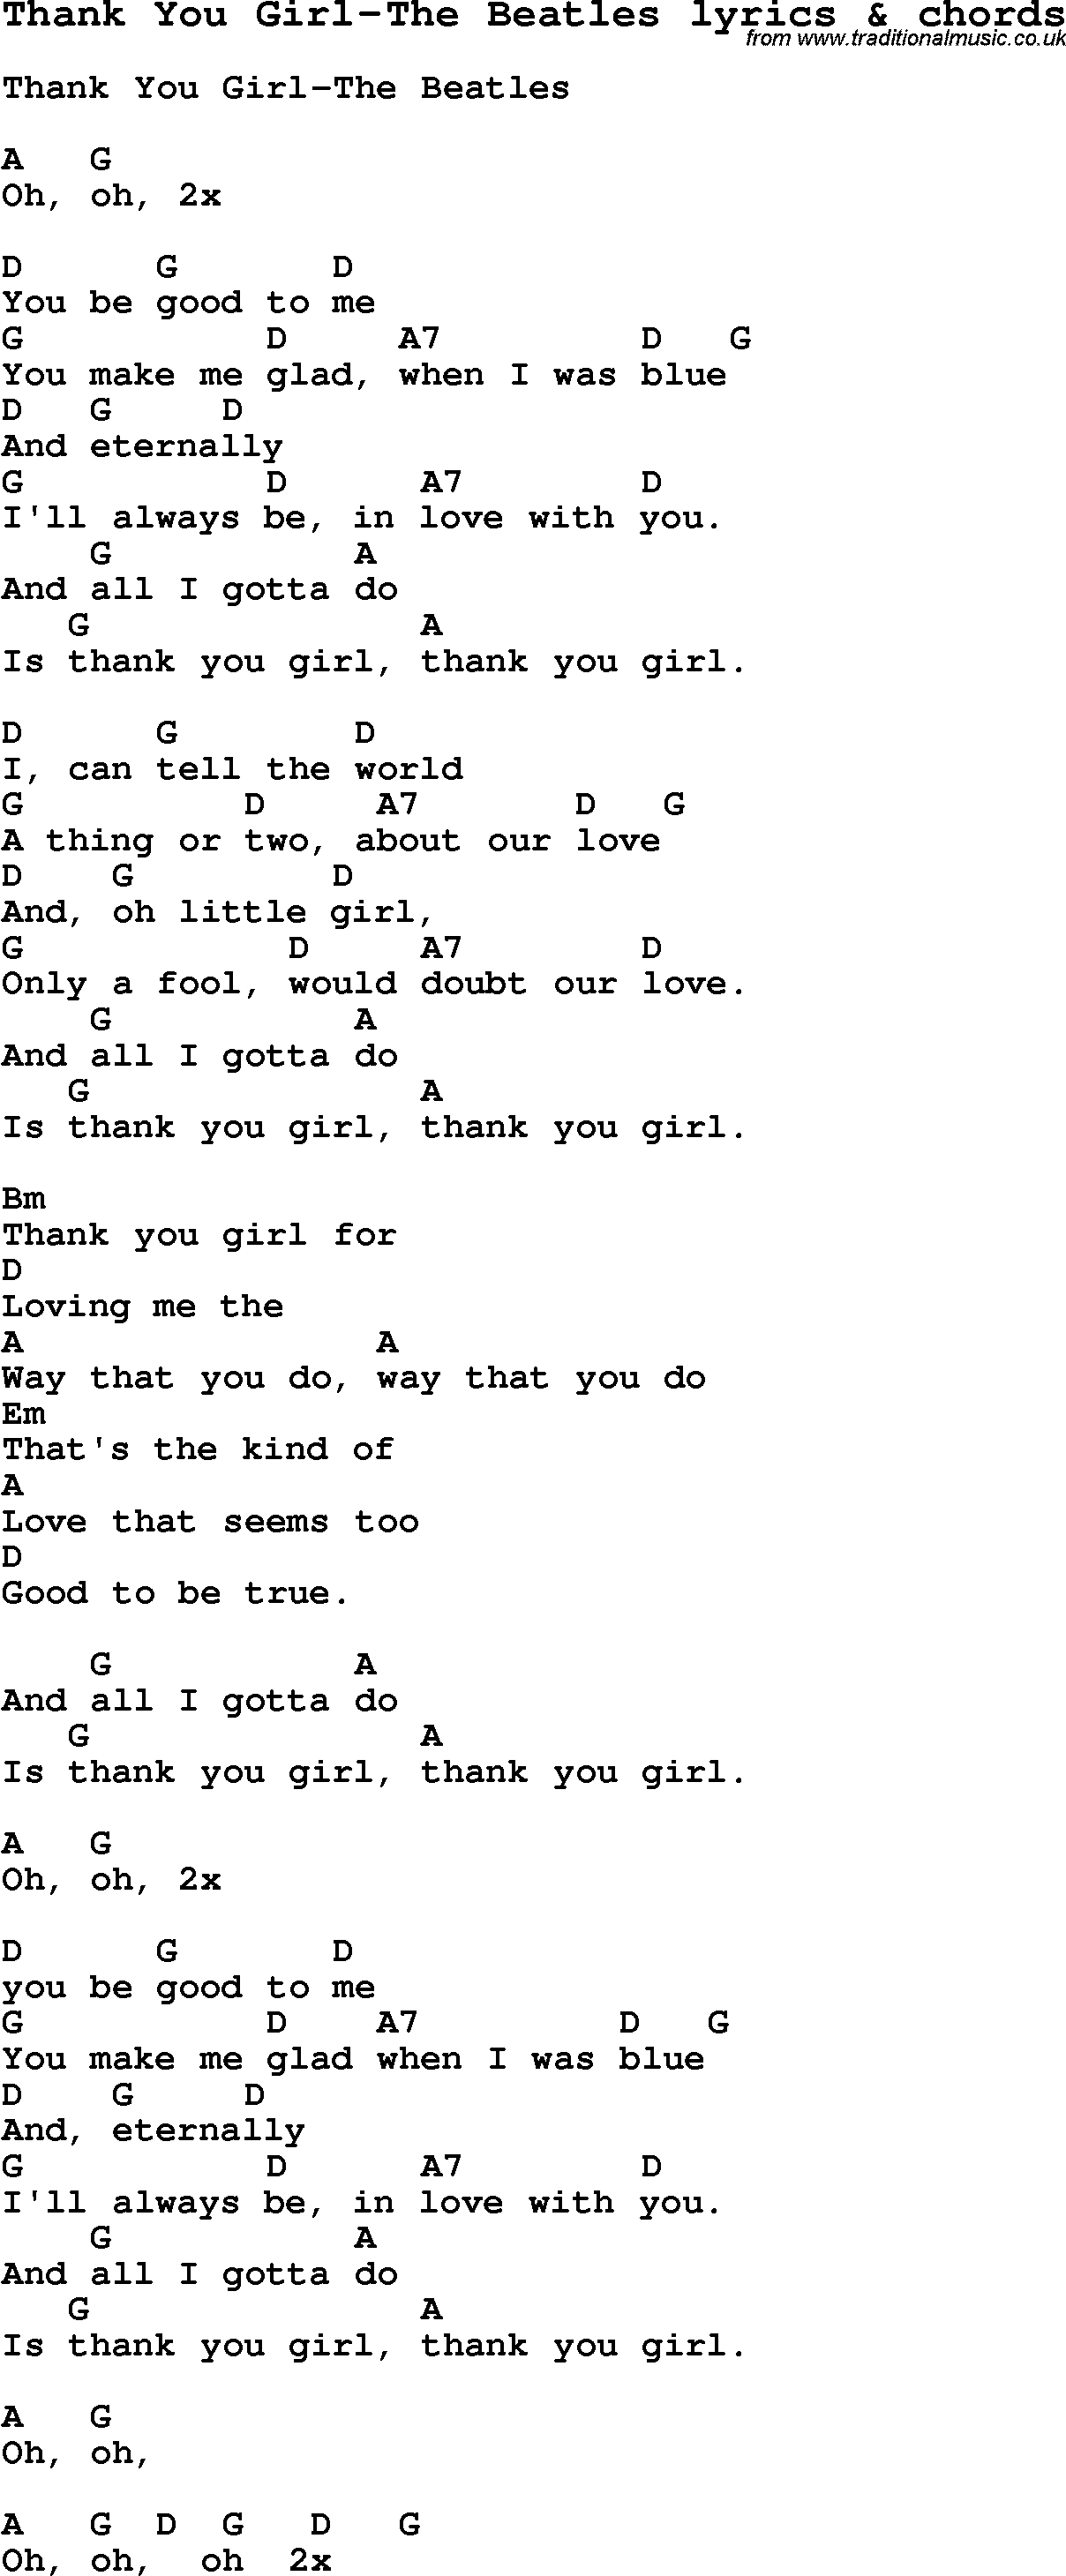 Love Song Lyrics for: Thank You Girl-The Beatles with chords for Ukulele, Guitar Banjo etc.